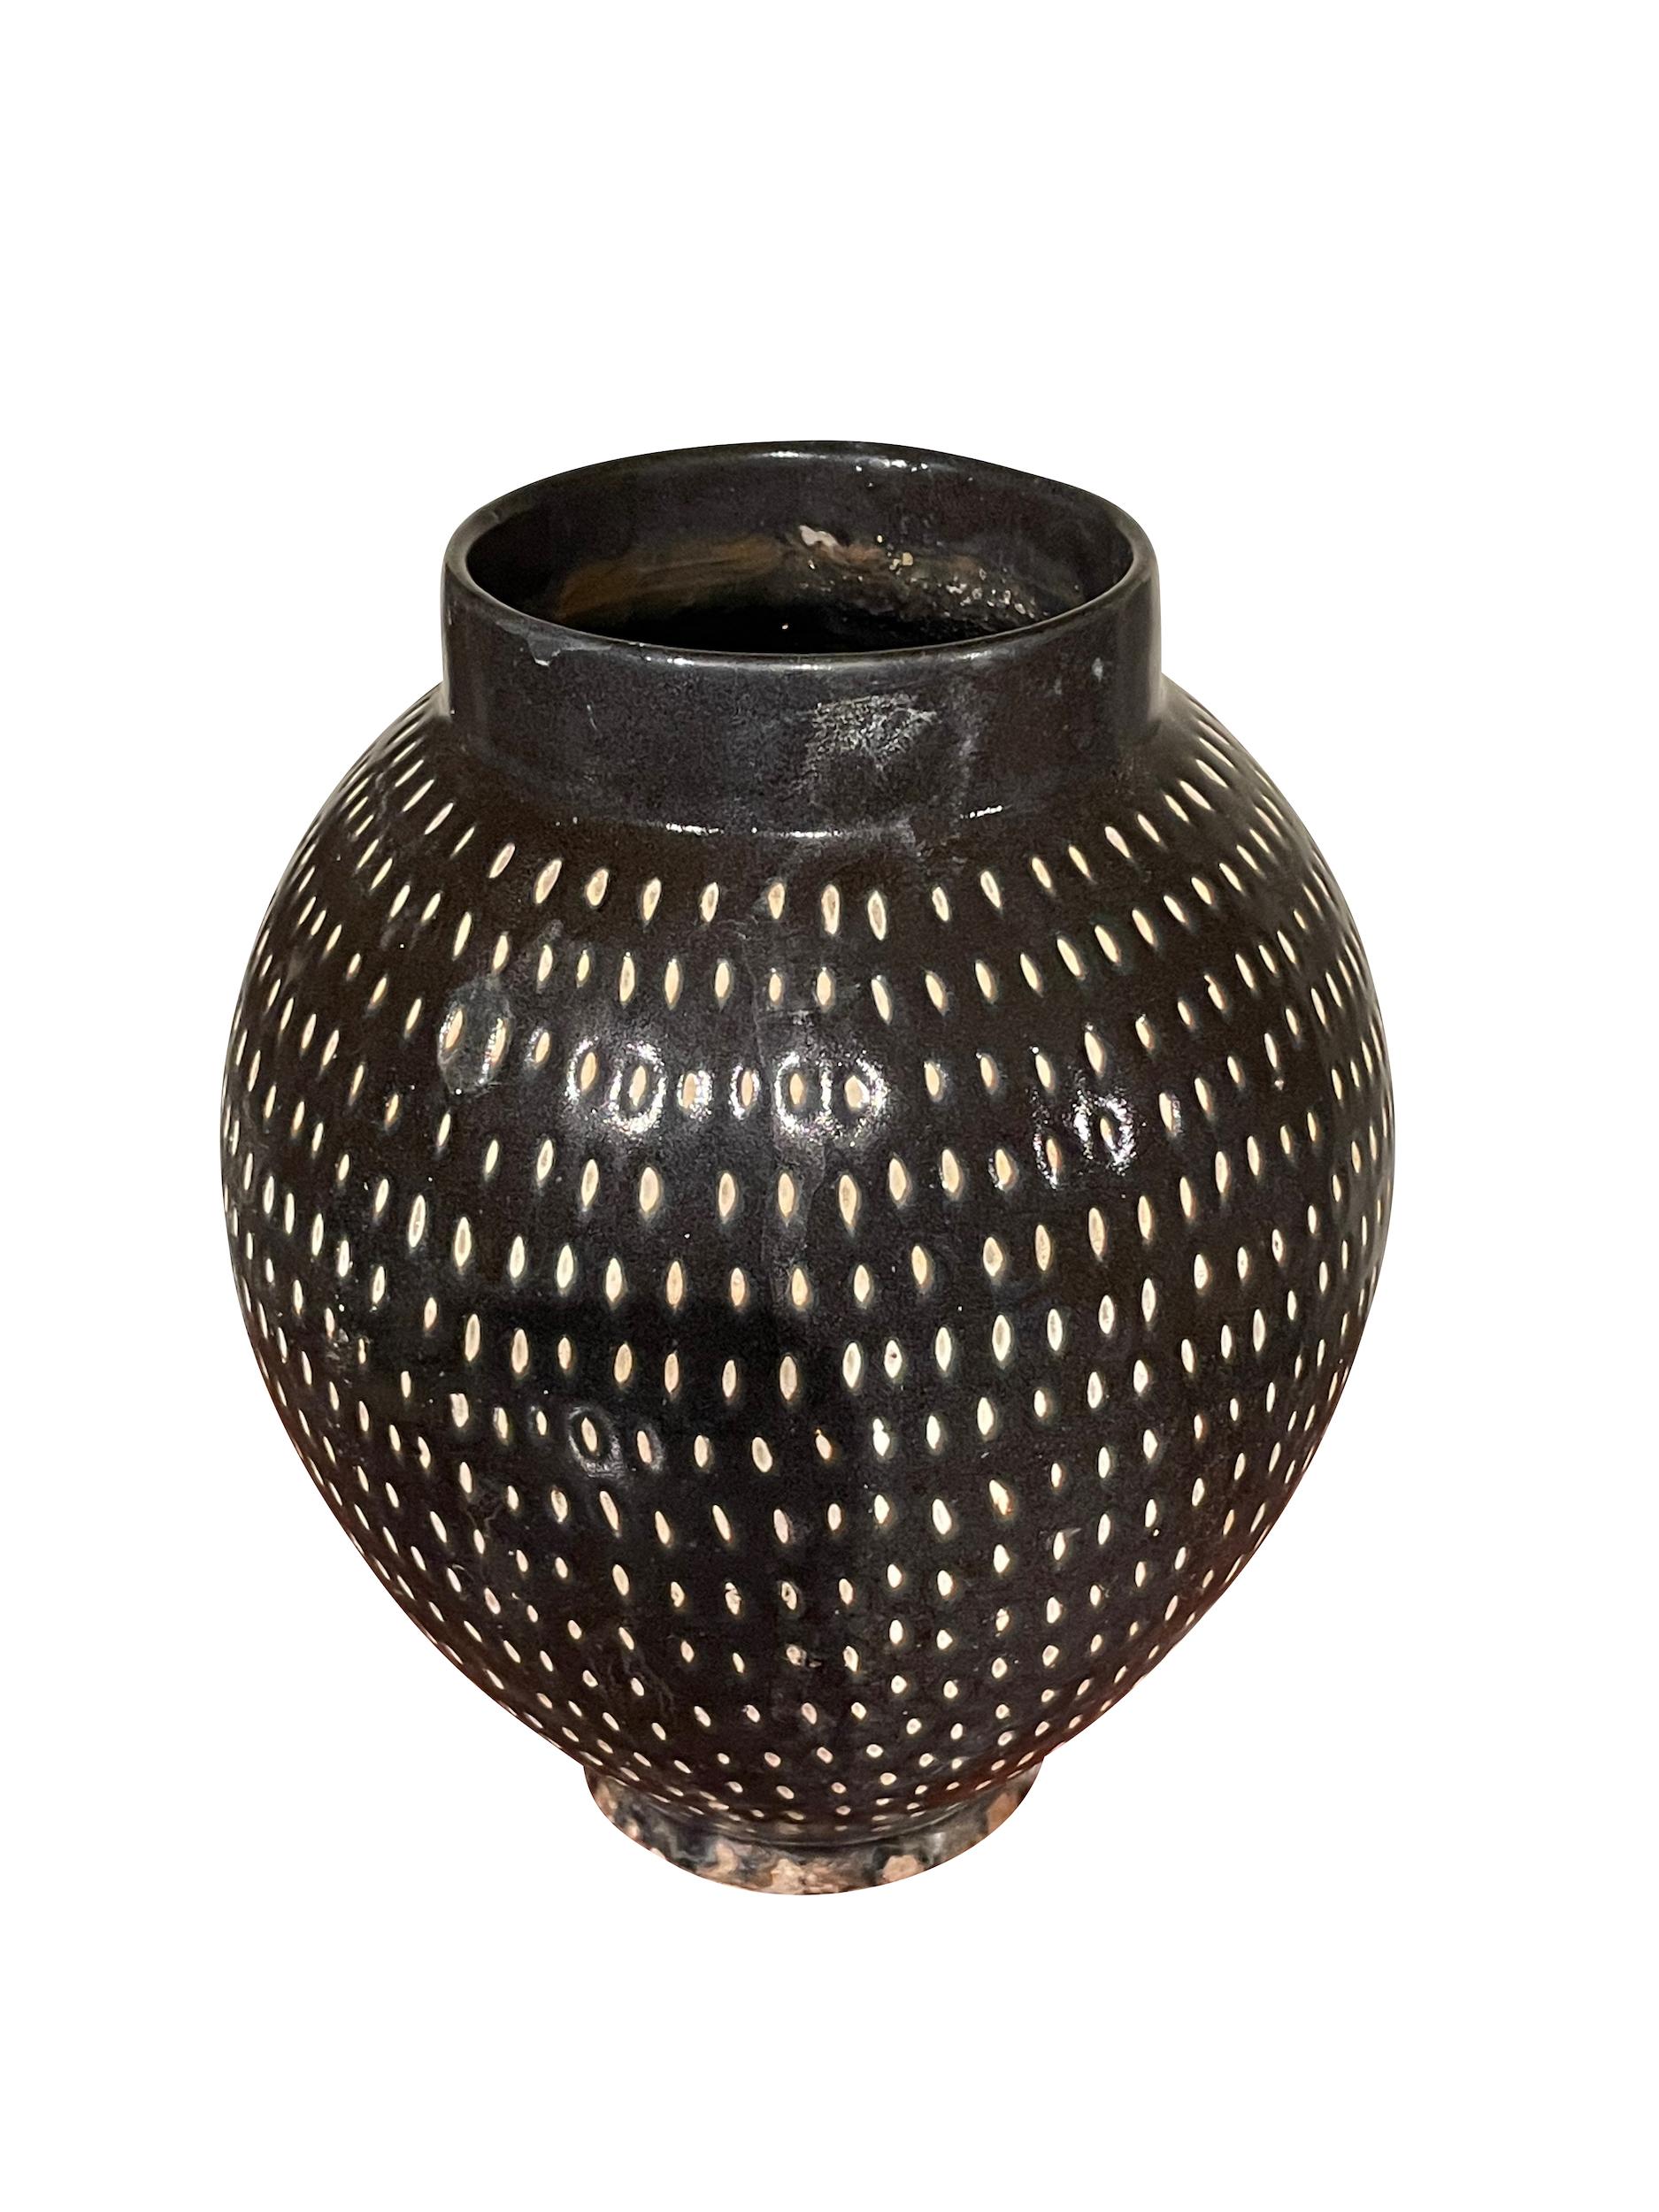 Contemporary Chinese black vase with decorative cream pin dots.
Two available and sold individually.